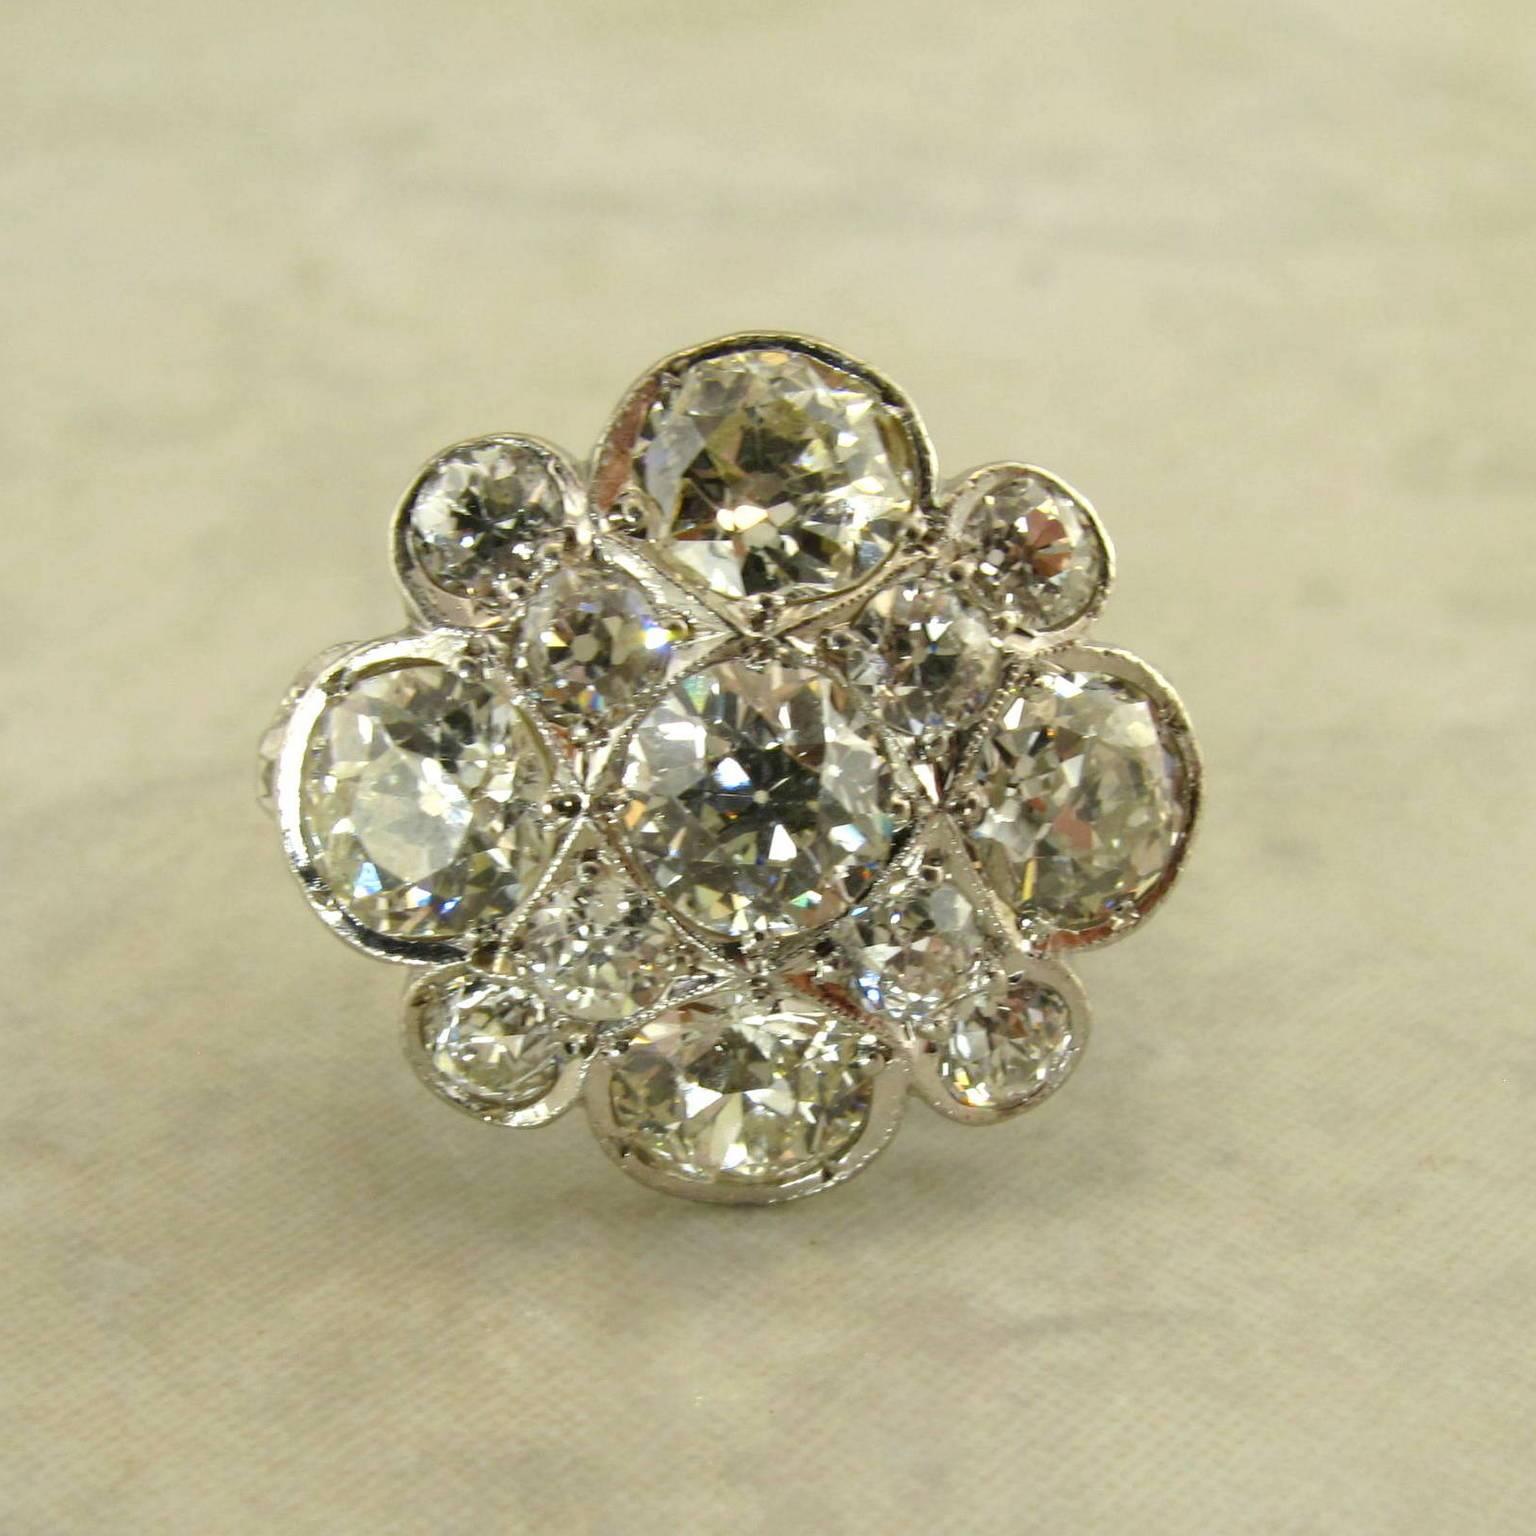 Platinum Old Mine Cut Diamond Cocktail Ring.
The cluster style ring top set with thirteen old mine cut diamonds and two on the shank, weighing approximately 3.0 carats total, with open work under gallery.
Size 6, including balls, easily sized.
Circa